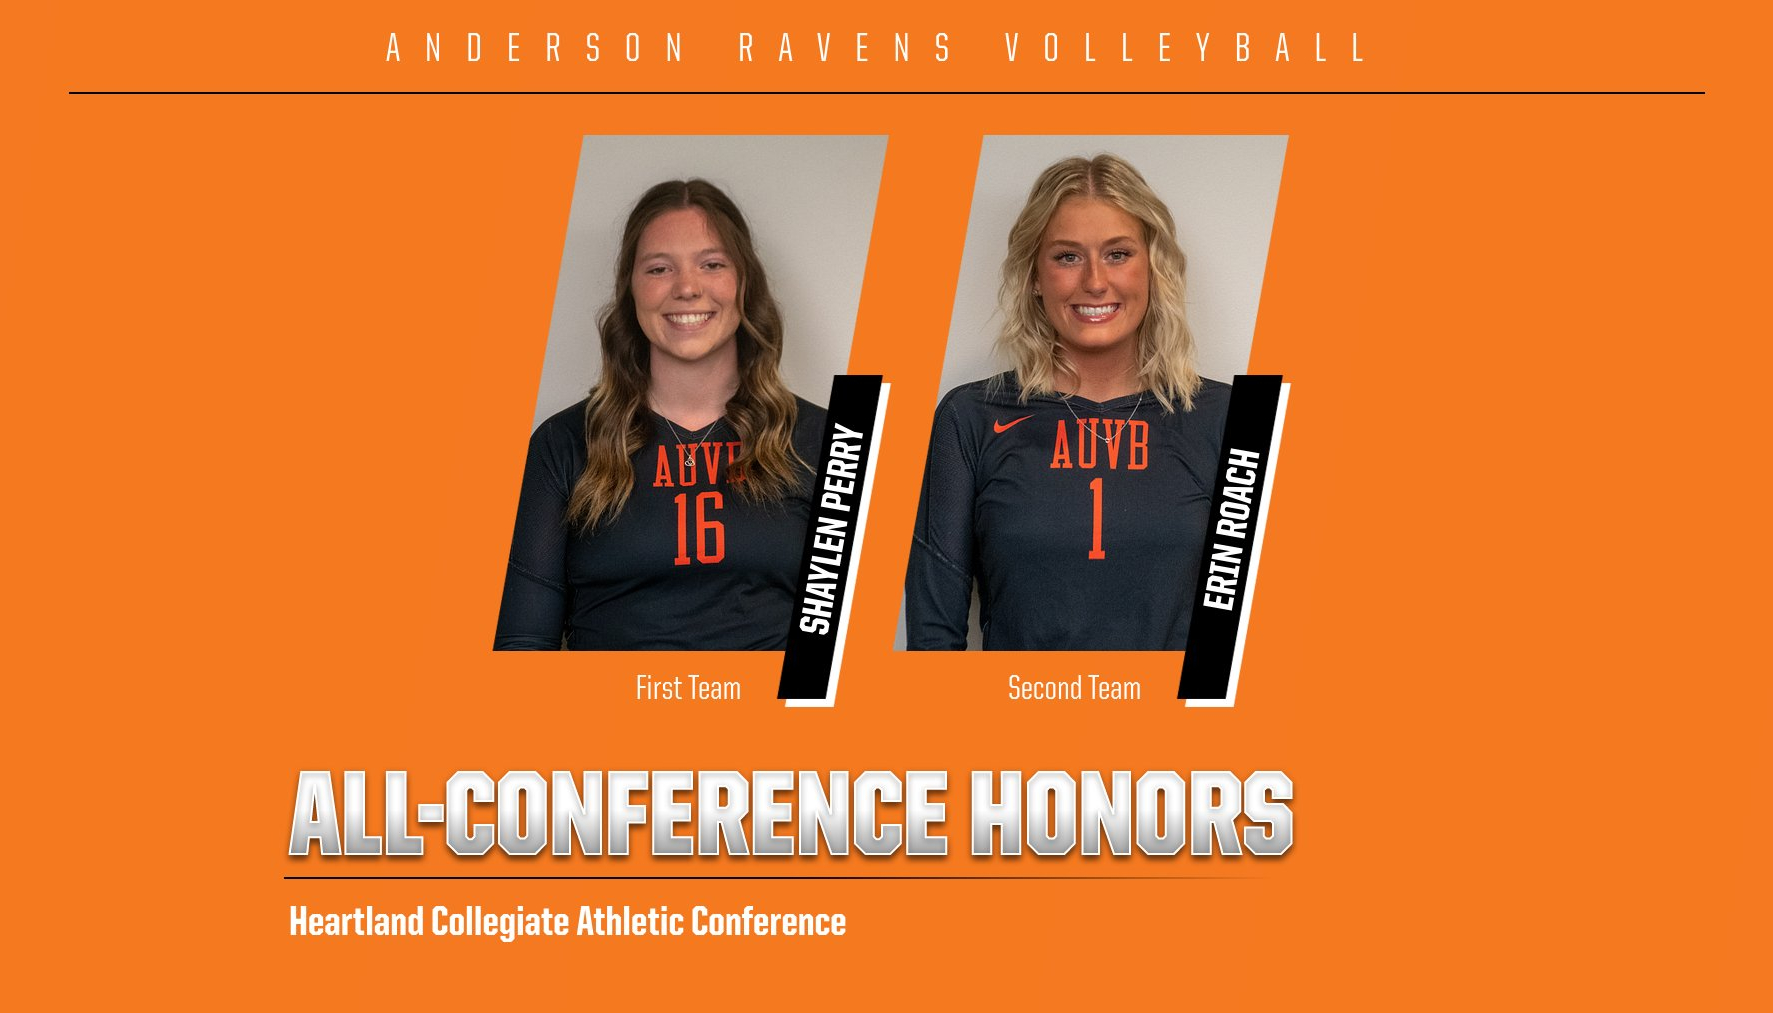 Perry, Roach Garner All-Conference Honors